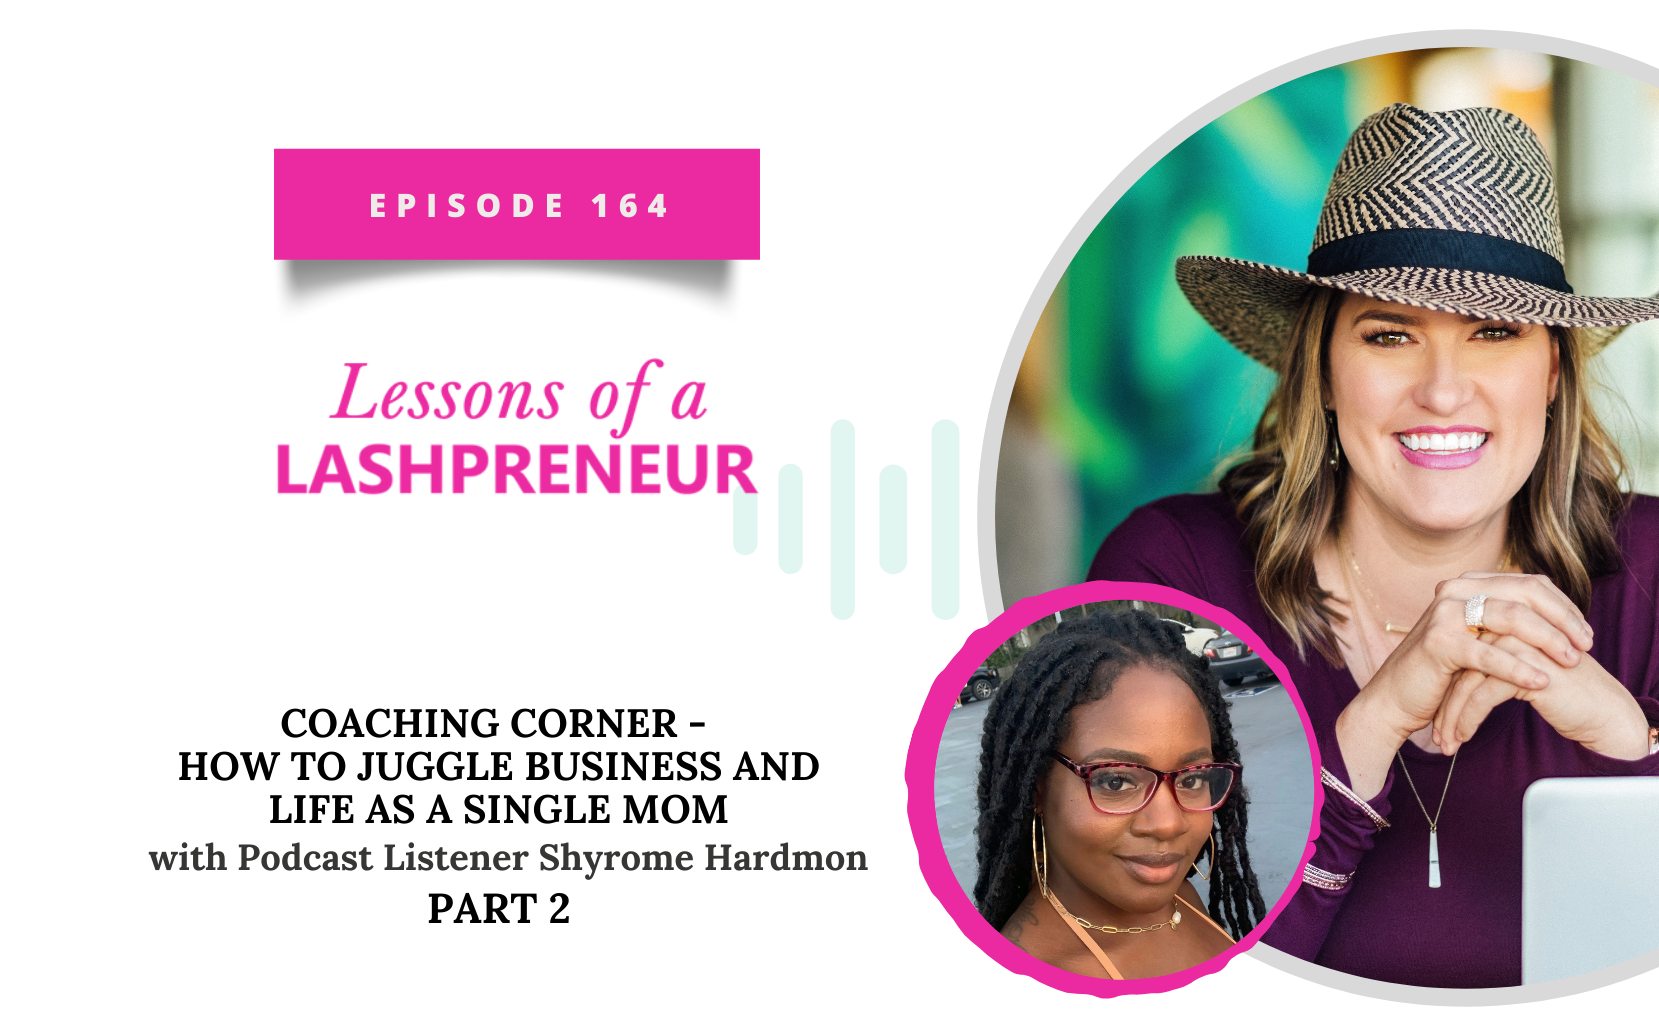 Coaching Corner: How to Juggle Business and Life as a Single Mom with Podcast Listener Shyrome Hardmon Part 2